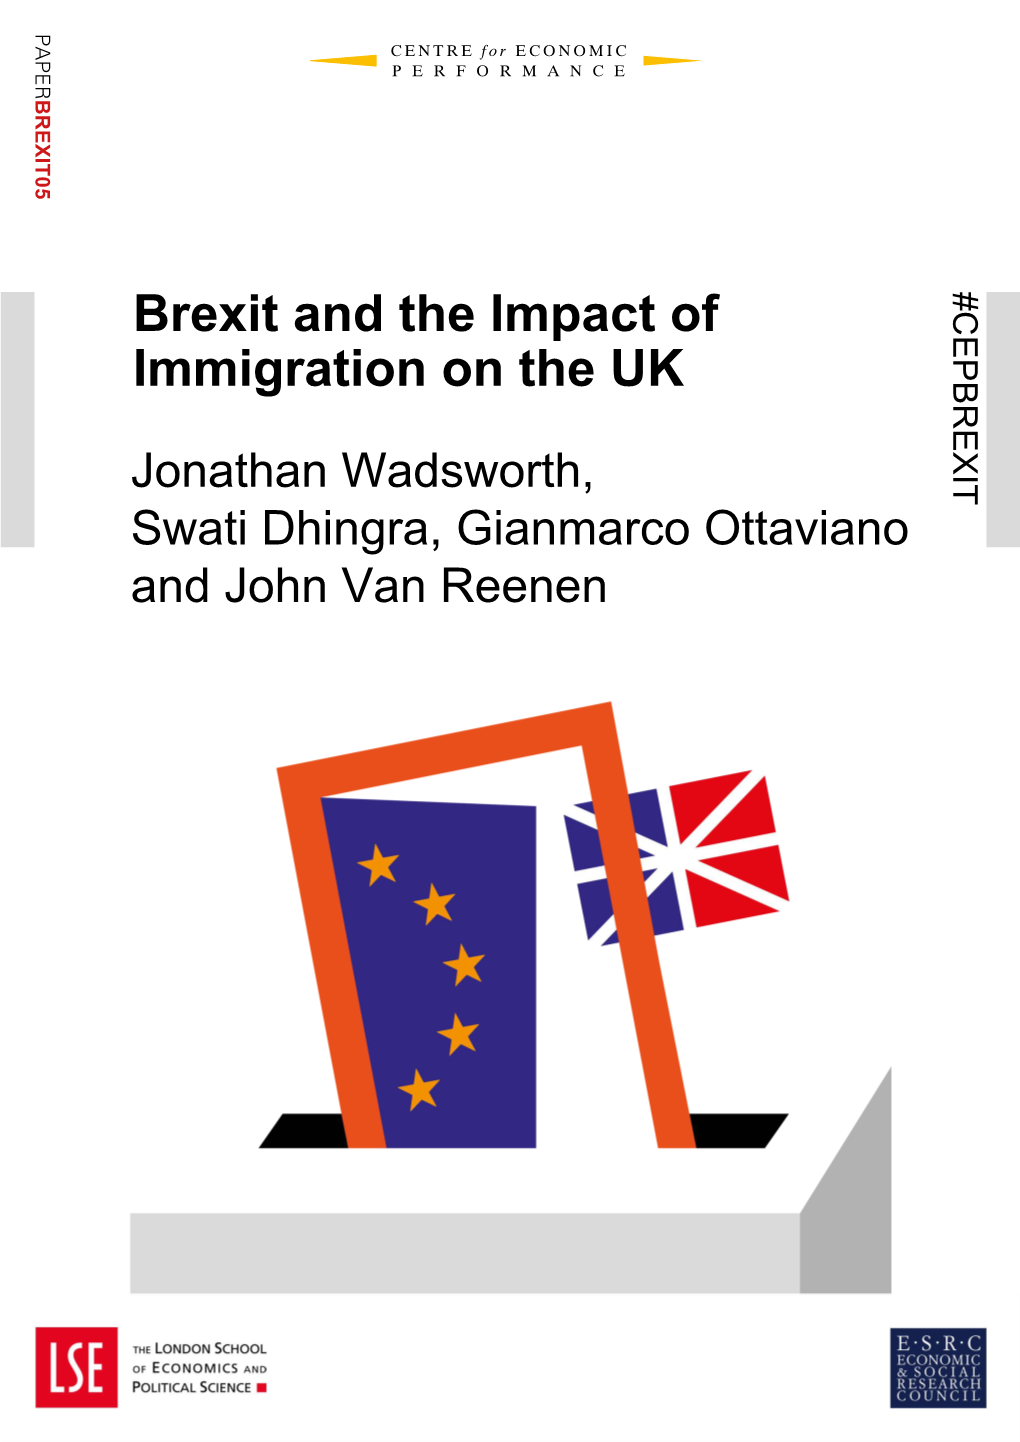 Brexit and the Impact of Immigration on the UK